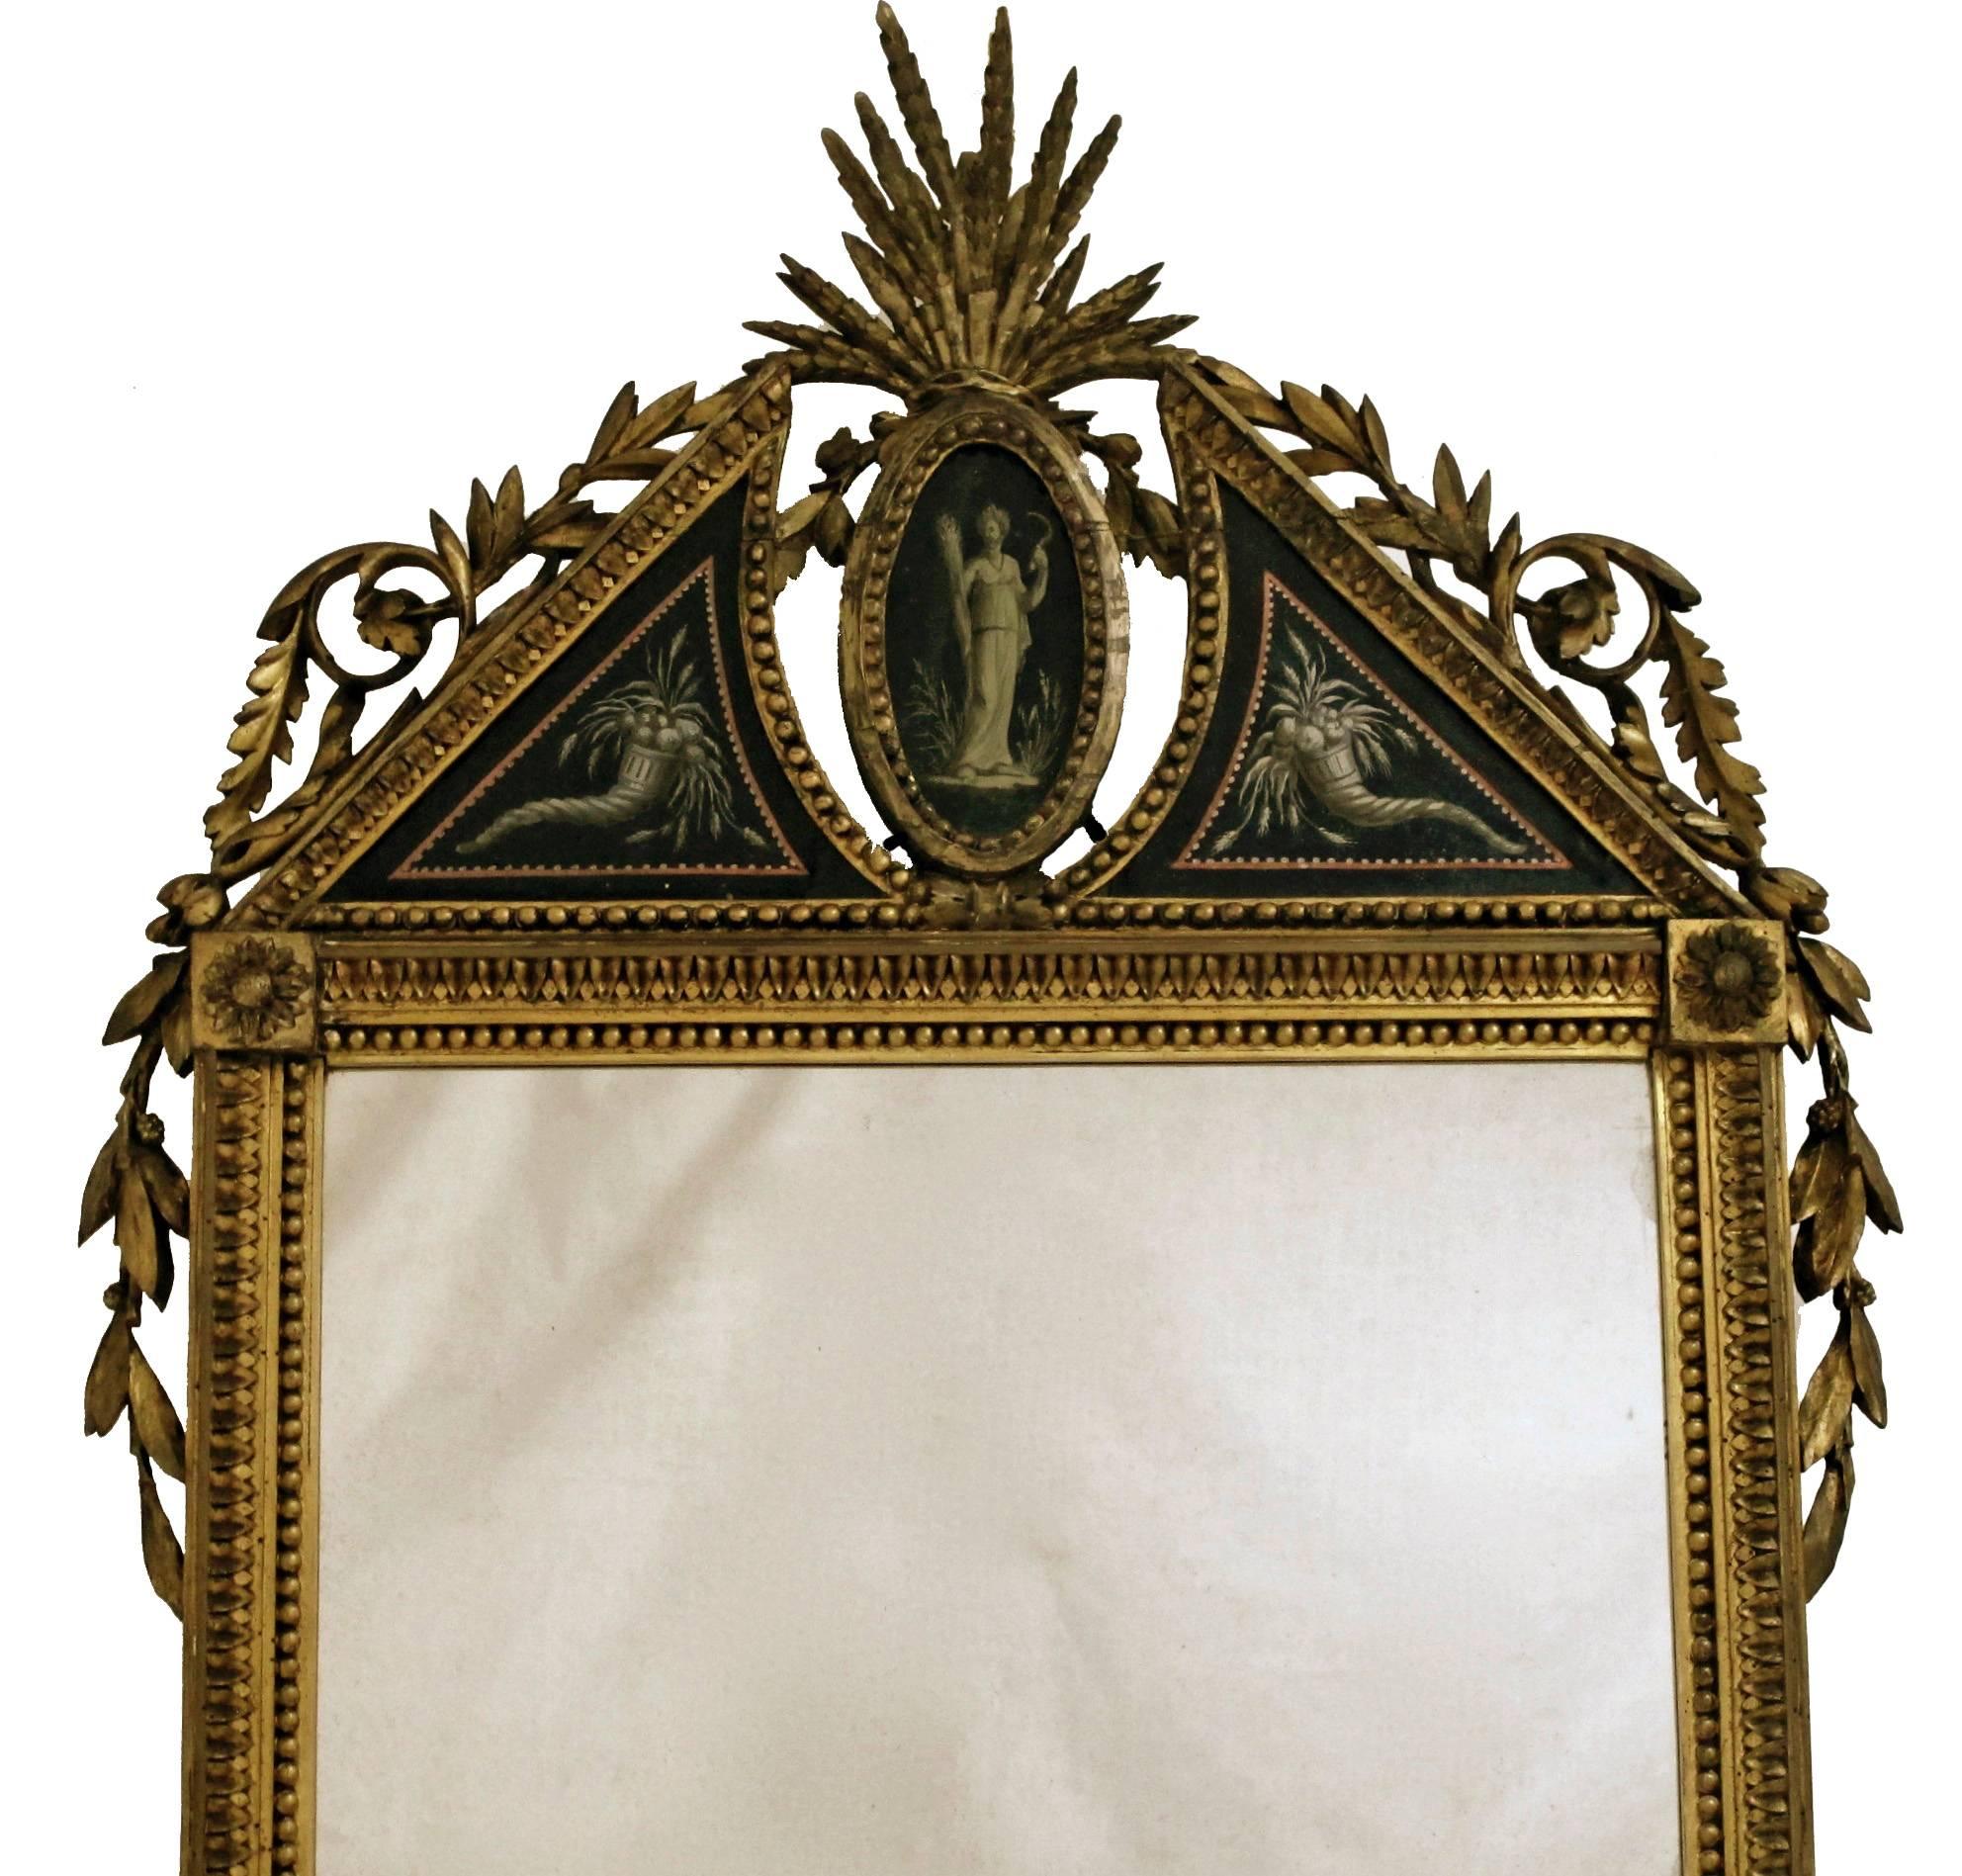 Exquisite French mirror. Finely carved and giltwood frame with hand-painted églomisé (reverse painted on glass) panels and original mirror, France, mid-late 18th century.